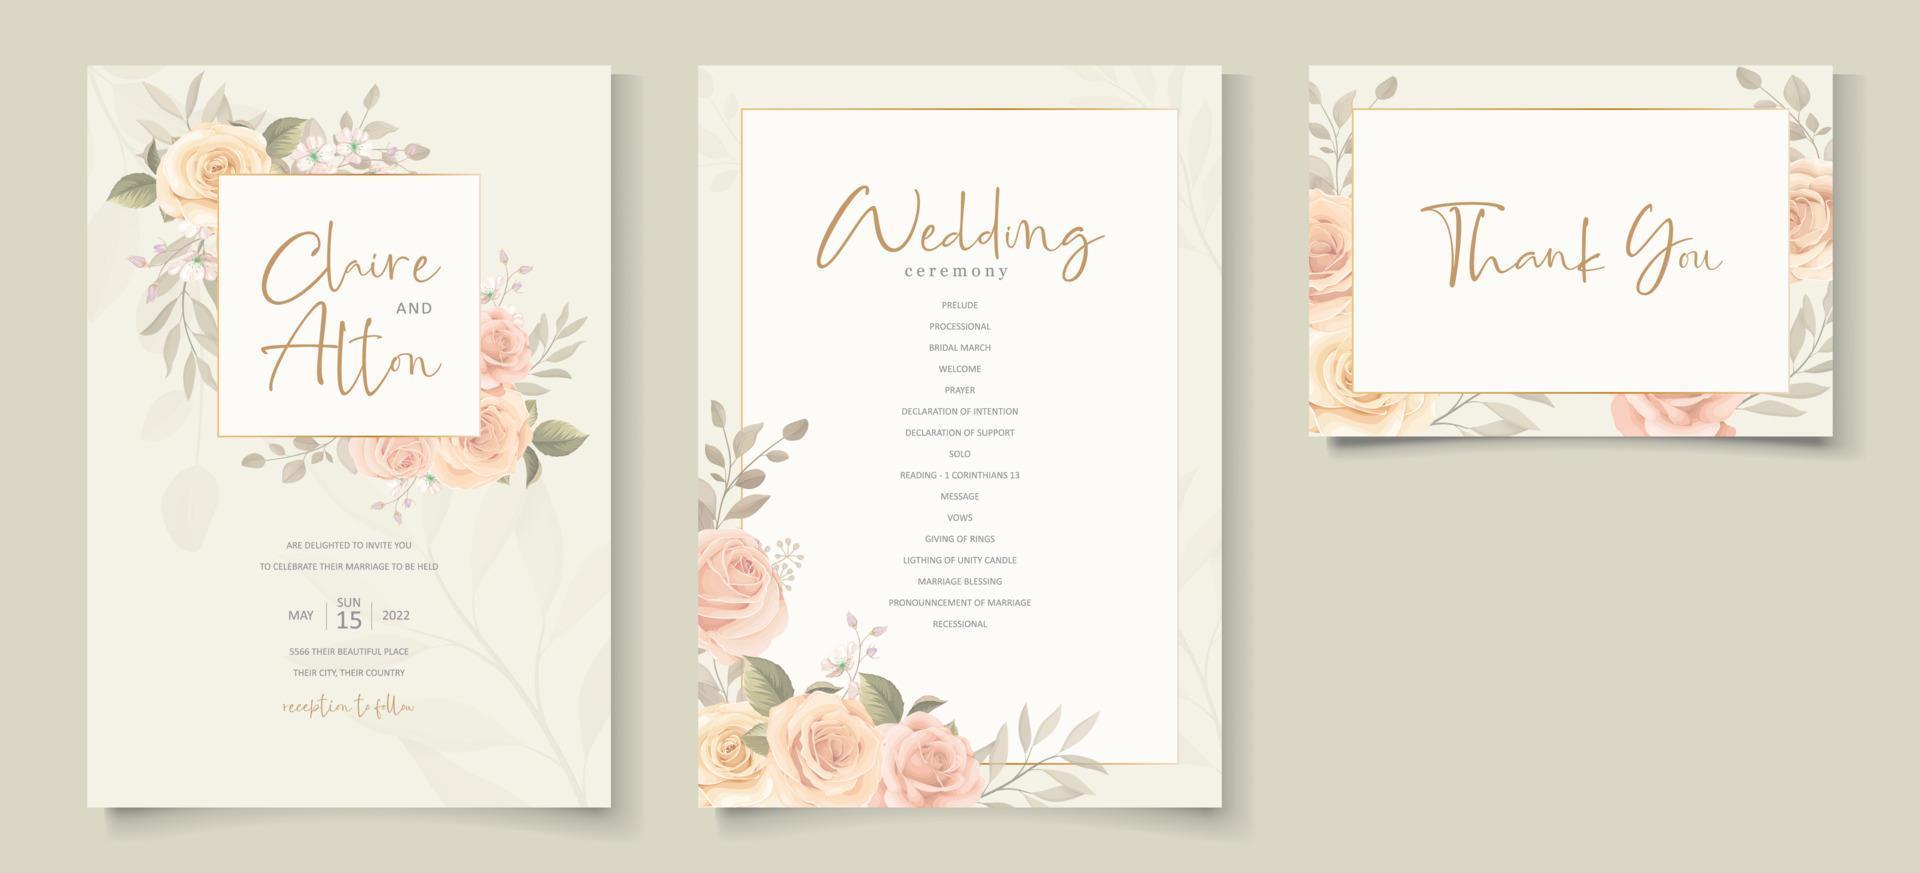 Elegant wedding invitation template with peach color floral theme vector